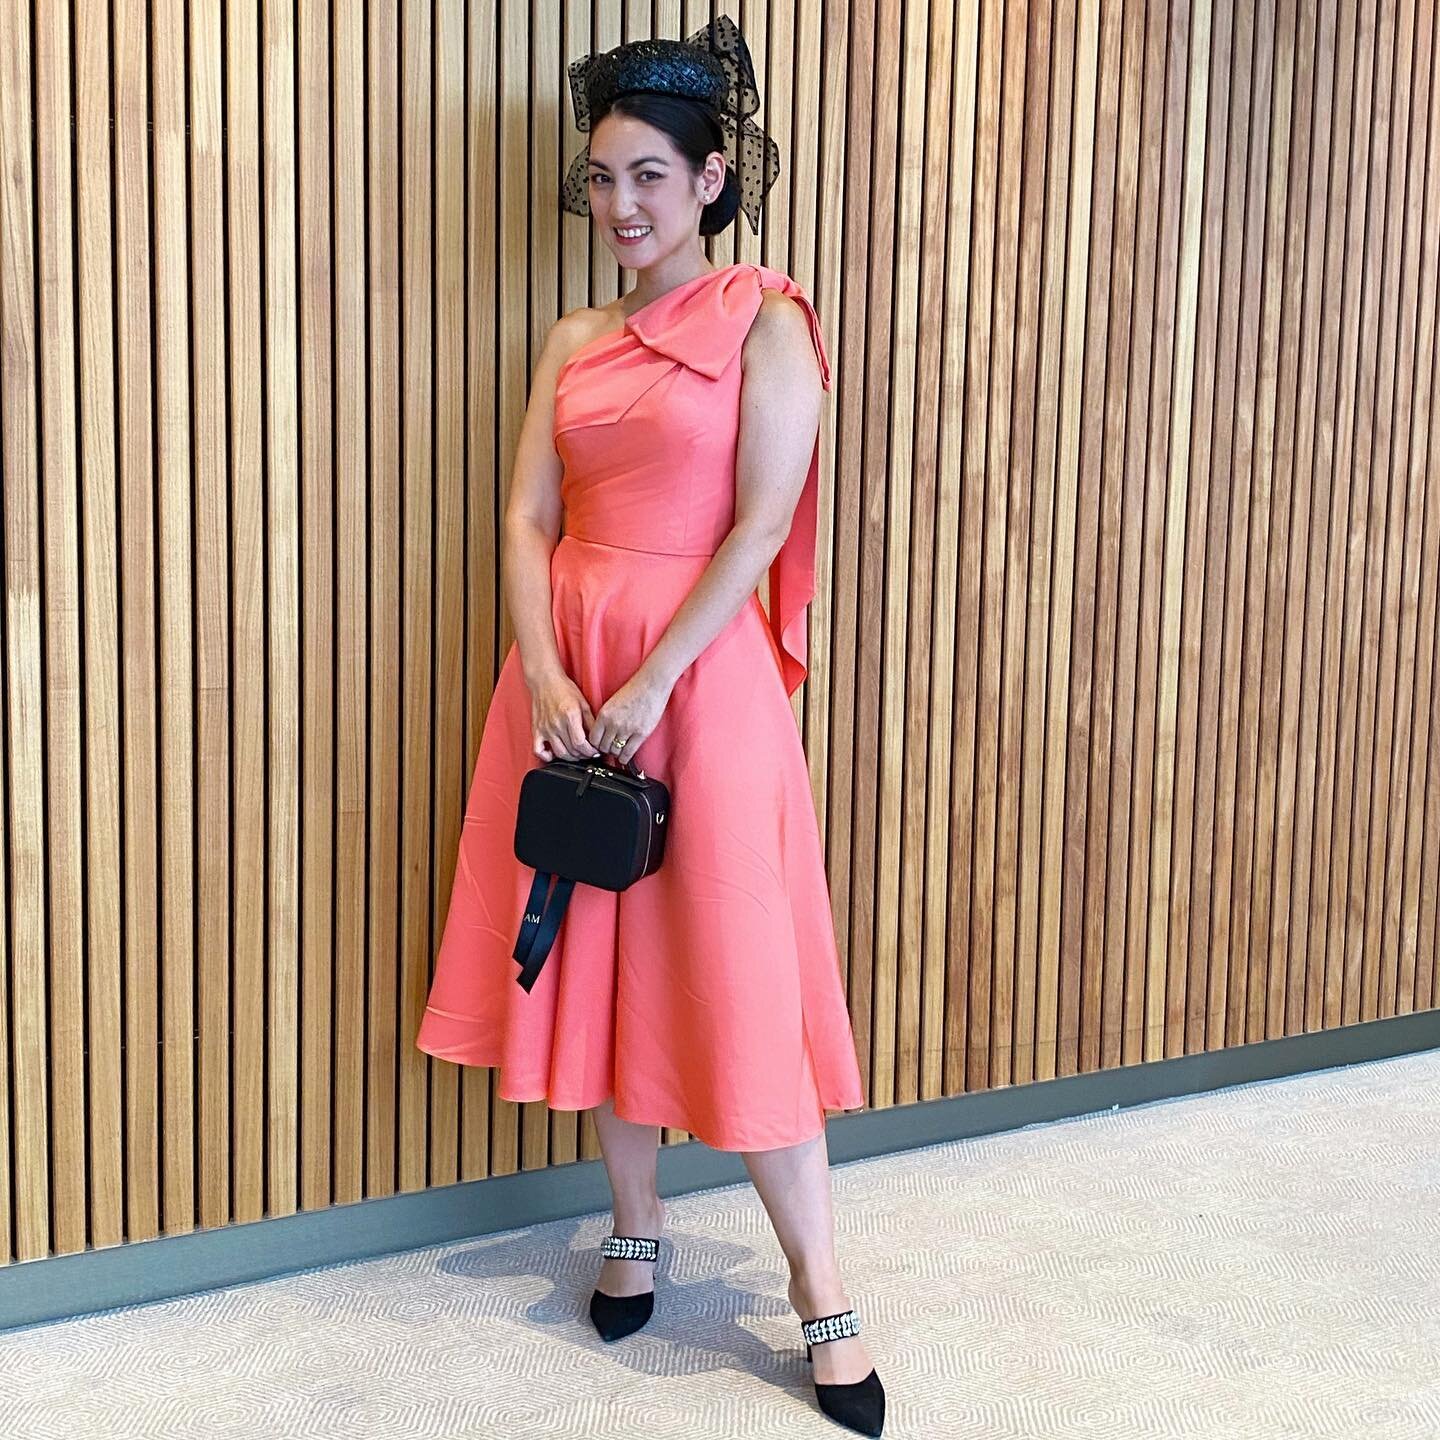 All dressed up for Black Caviar at Flemington today 🧡🖤🧡 Dress and hat made by me